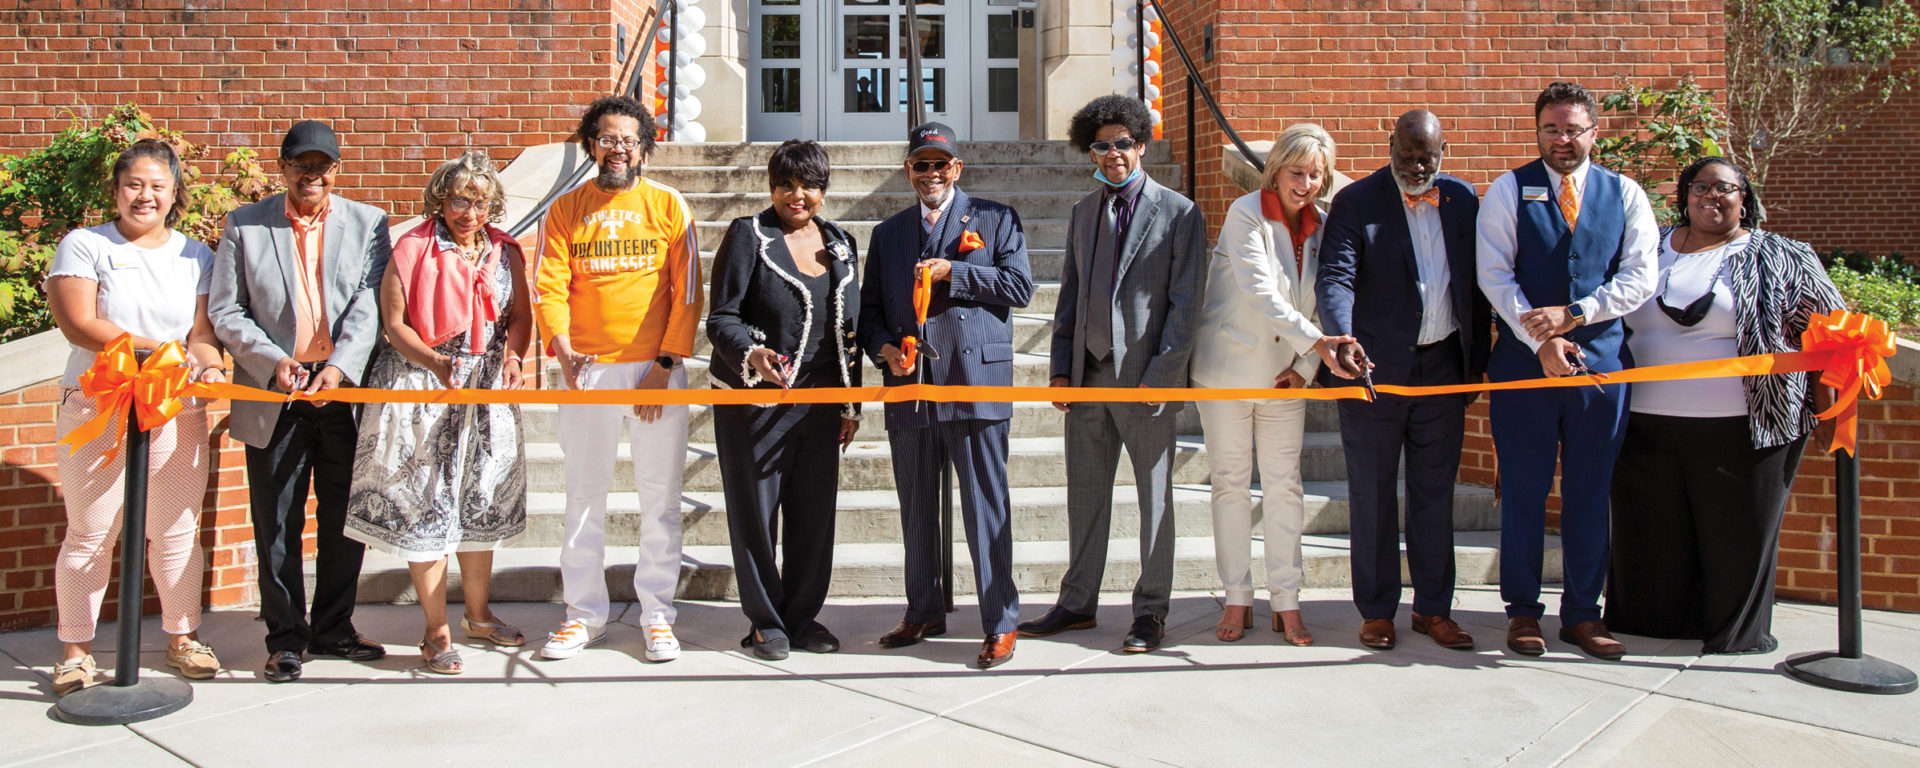 A group of students, alumni and officals cut the ribbon in front of two UT residence halls